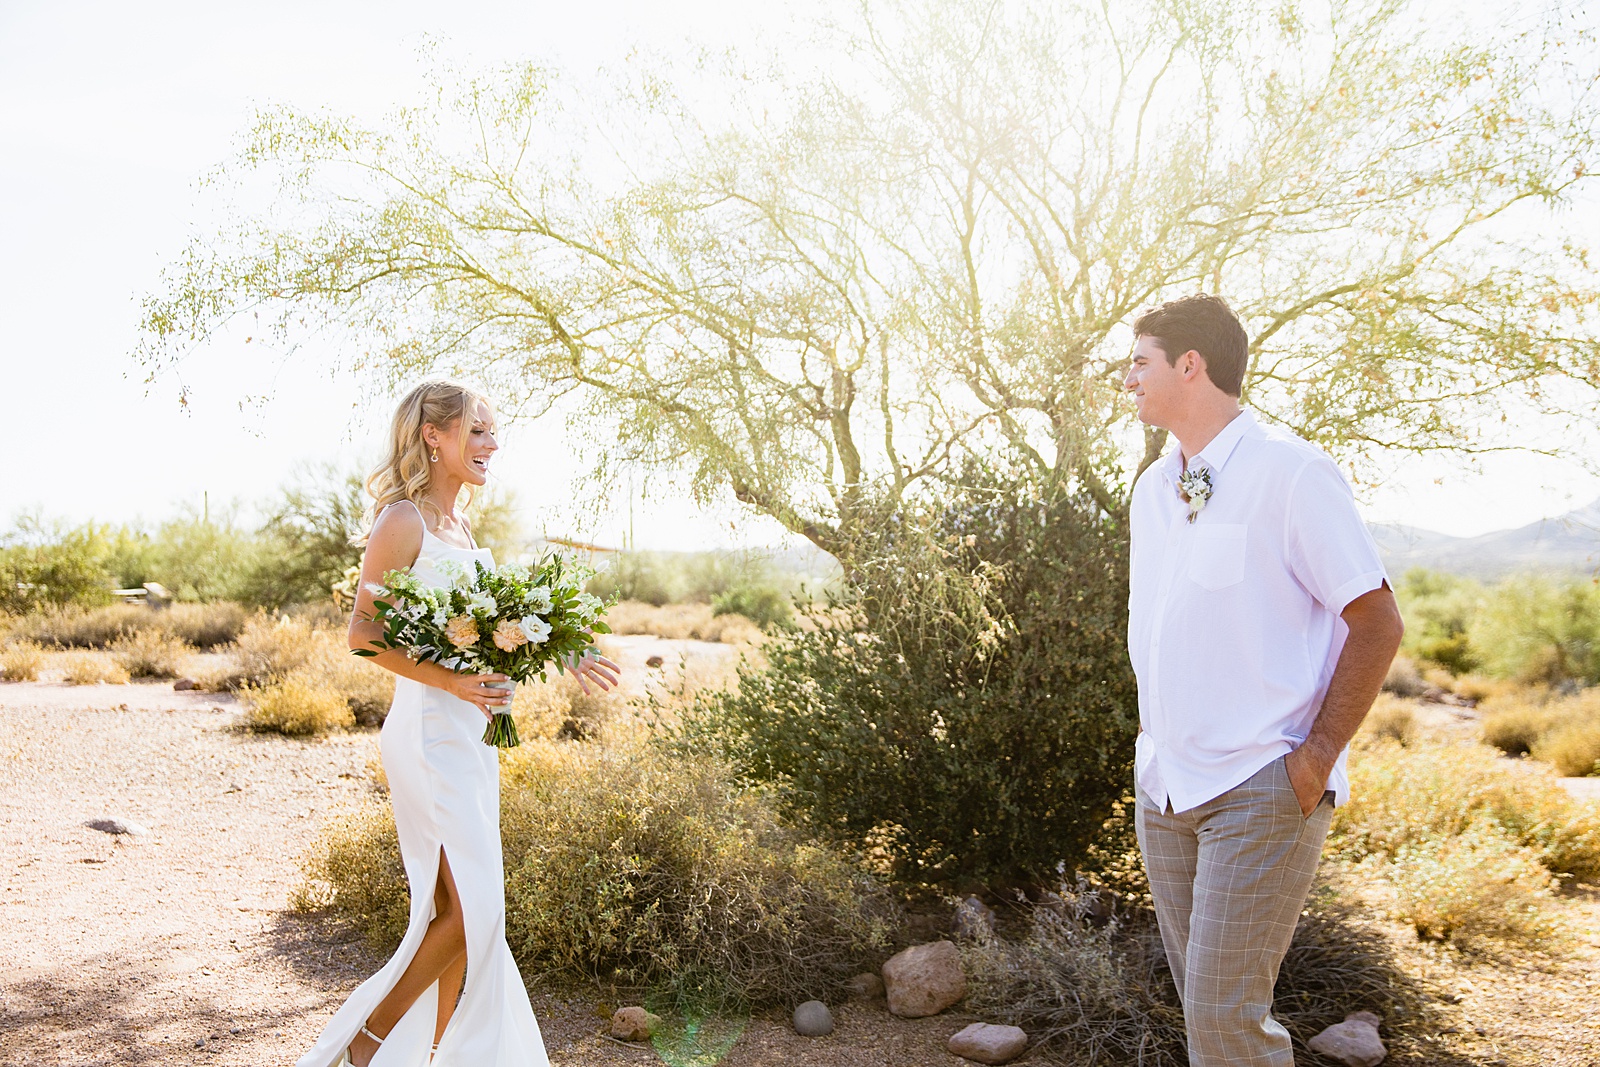 Bride and Groom's first look at Superstition Mountain Micro by Phoenix wedding photographer PMA Photography.